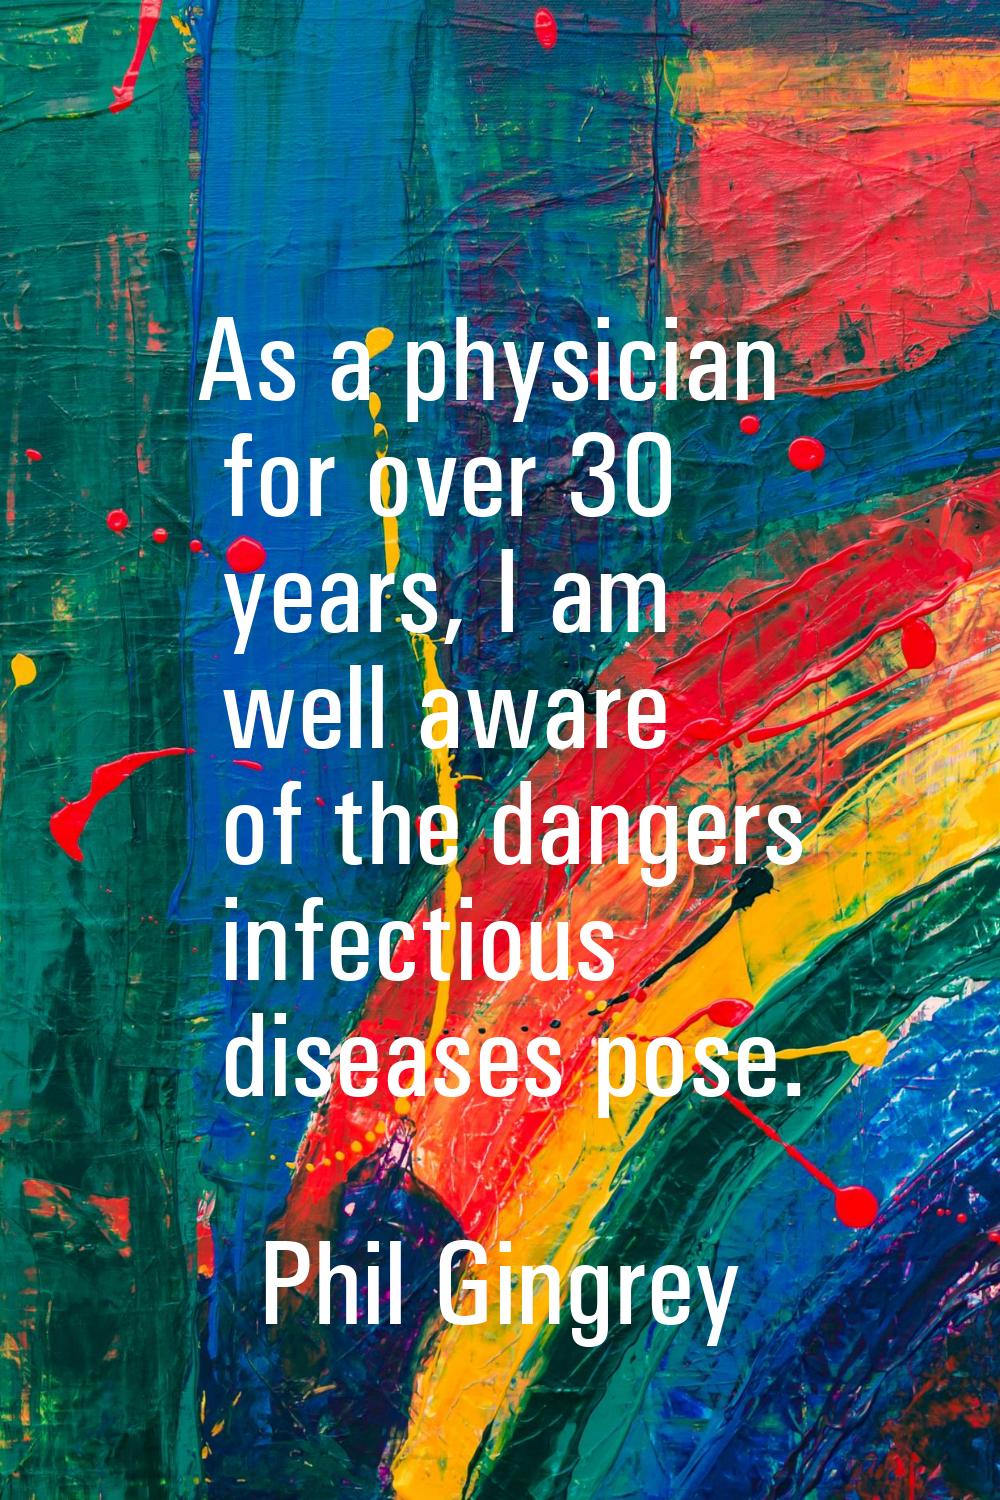 As a physician for over 30 years, I am well aware of the dangers infectious diseases pose.